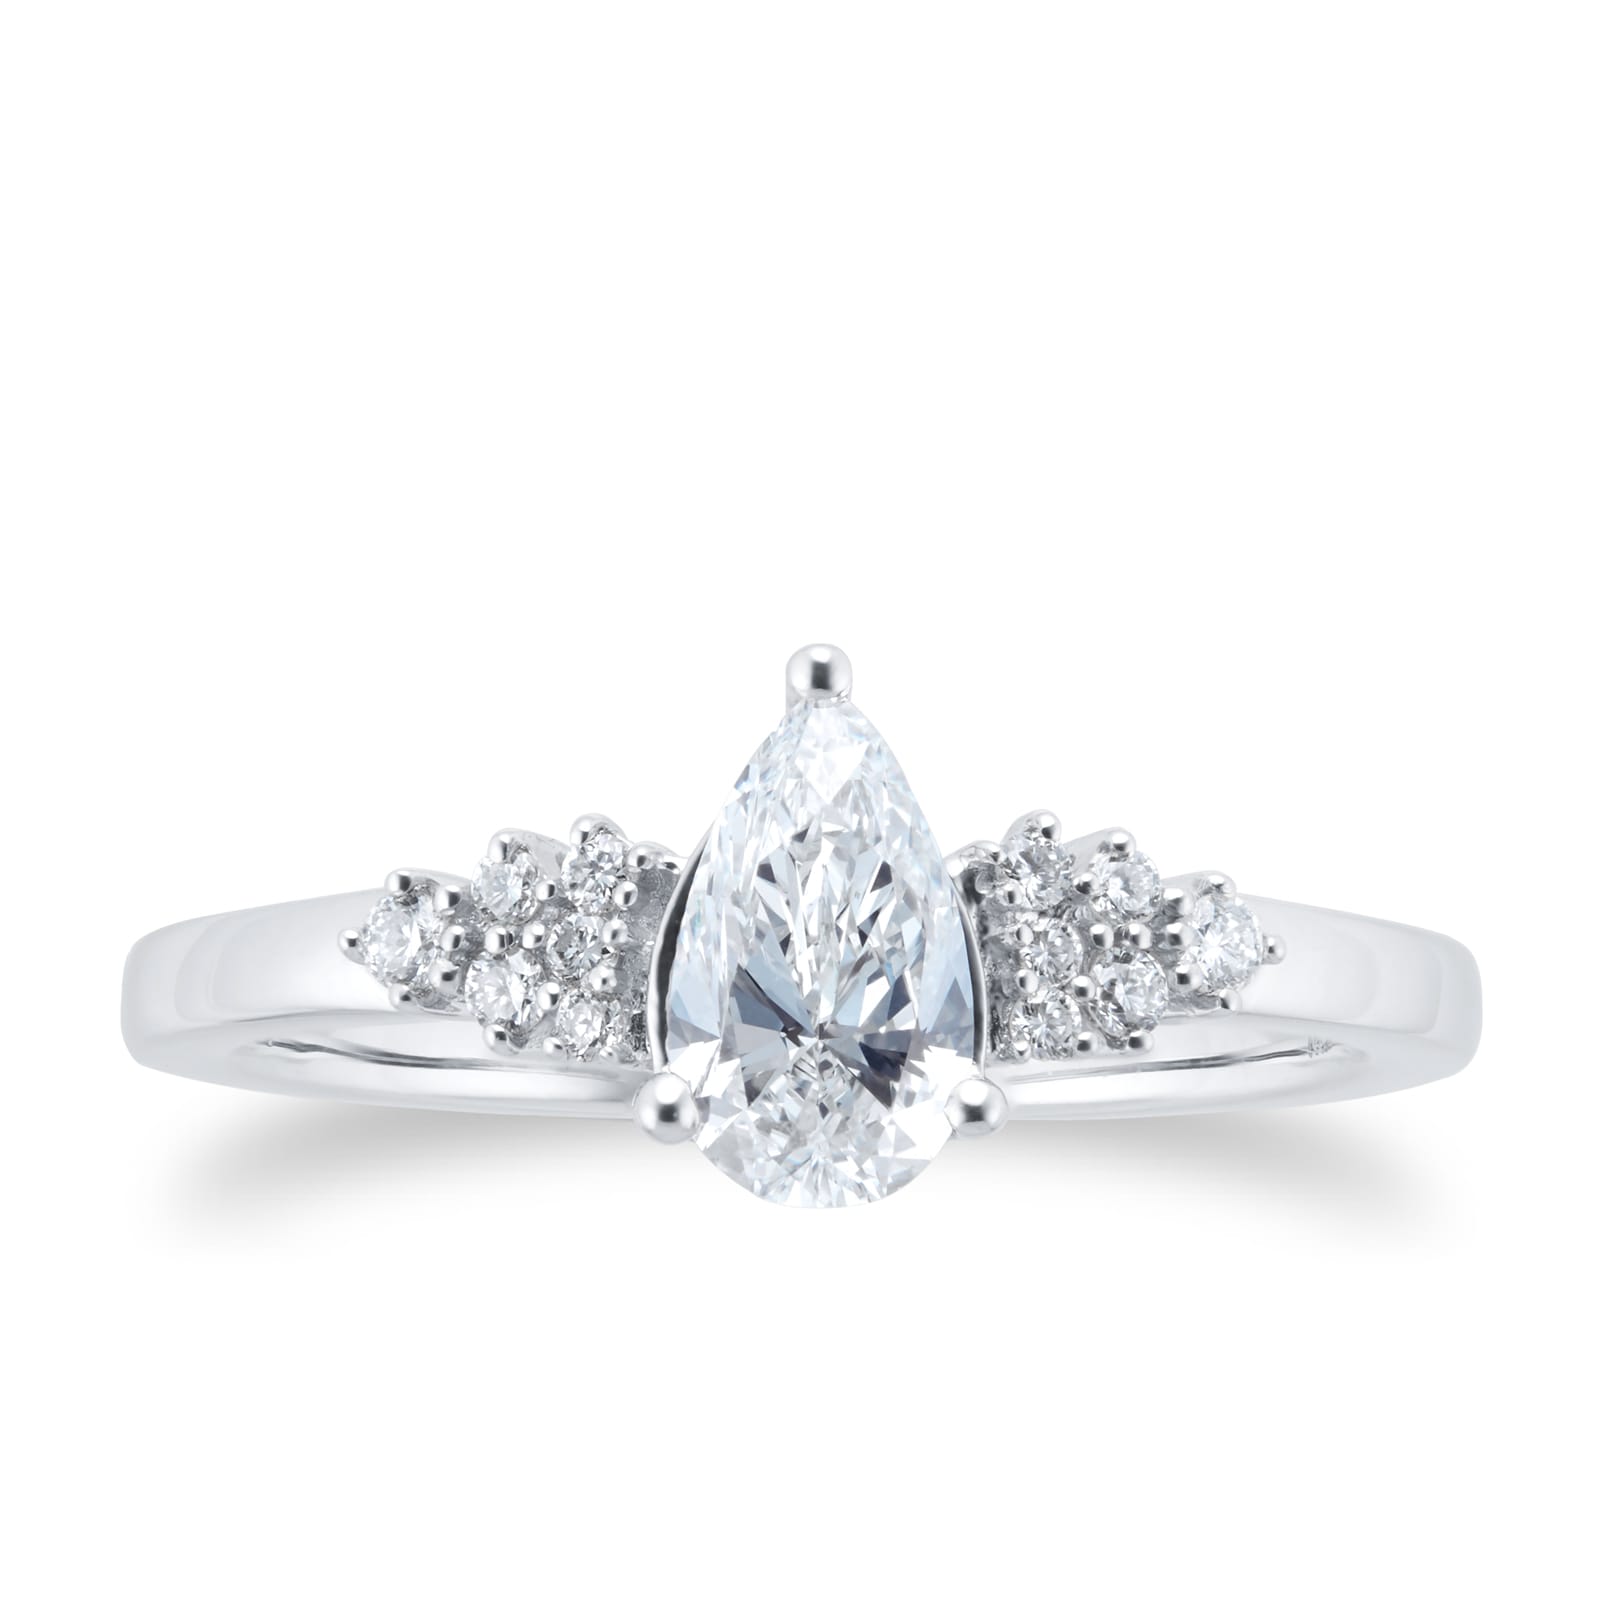 Platinum 0.70cttw Diamond Pear Scatter Engagement Ring - Ring Size L